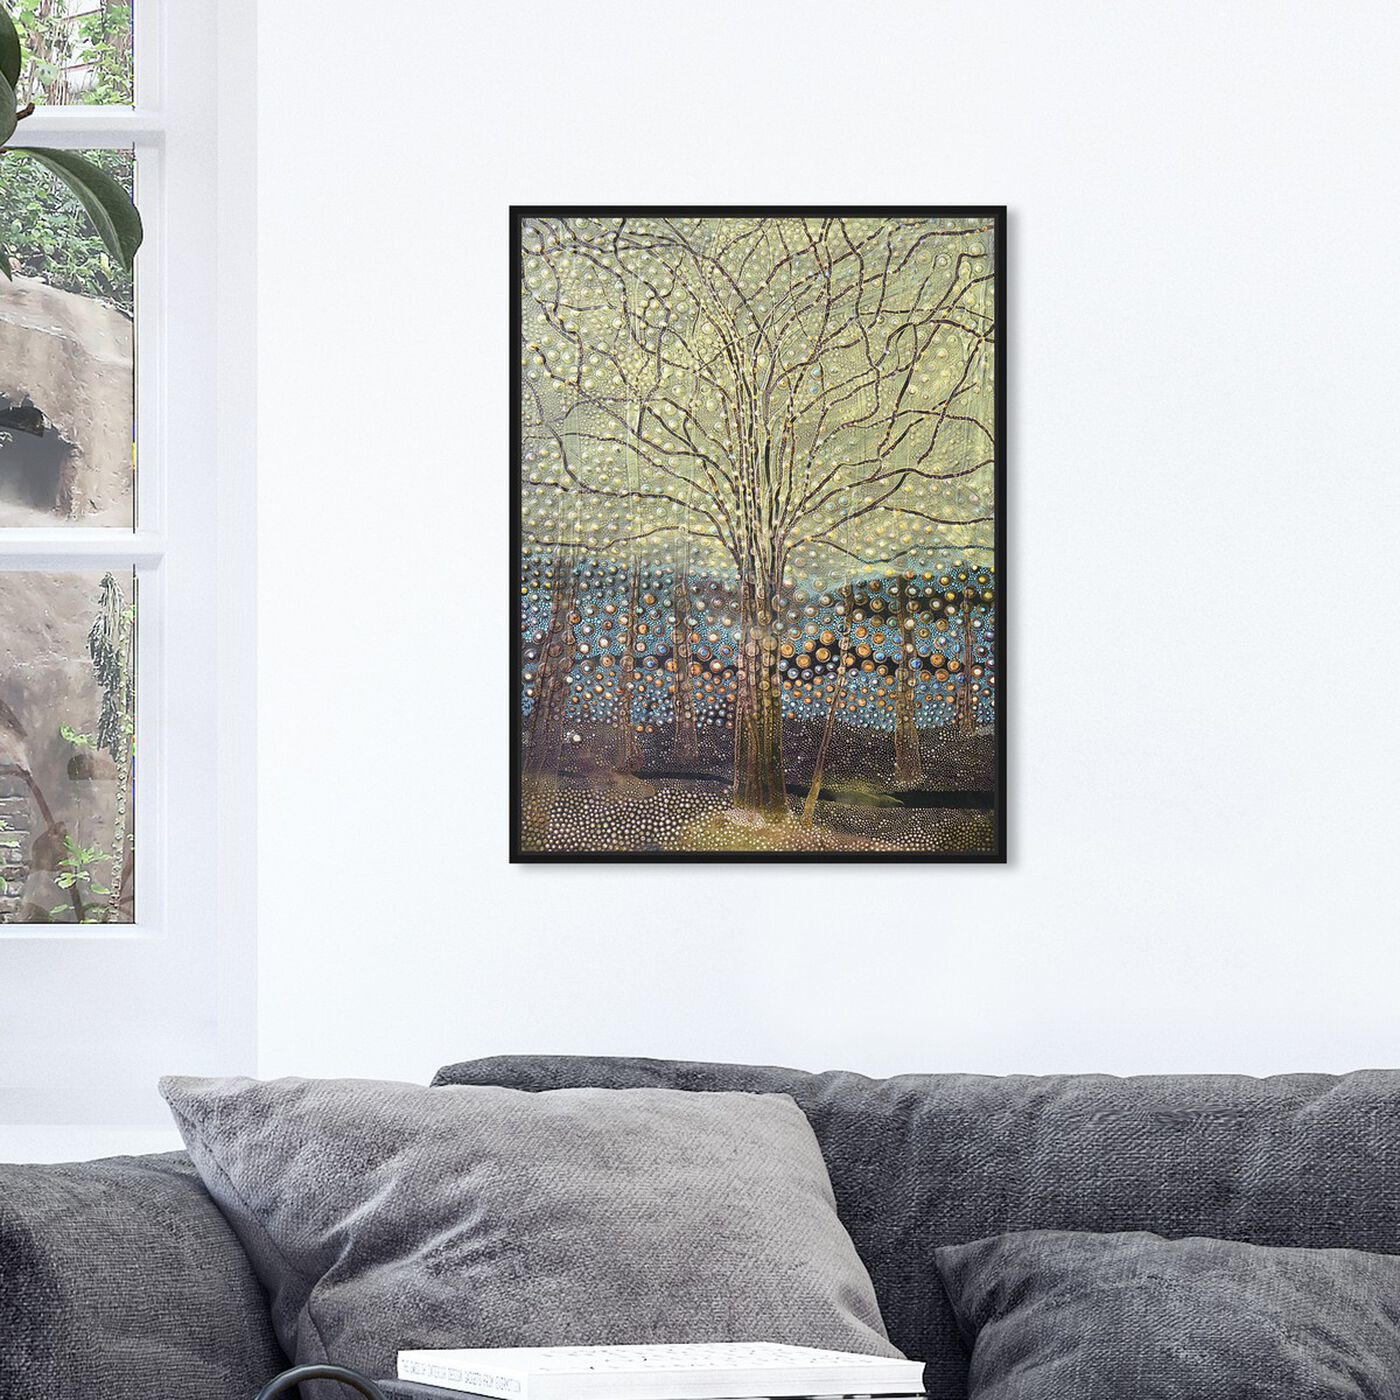 Hanging view of Enriqueta Ahrensburg - Arbol del conocimiento featuring nature and landscape and forest landscapes art.